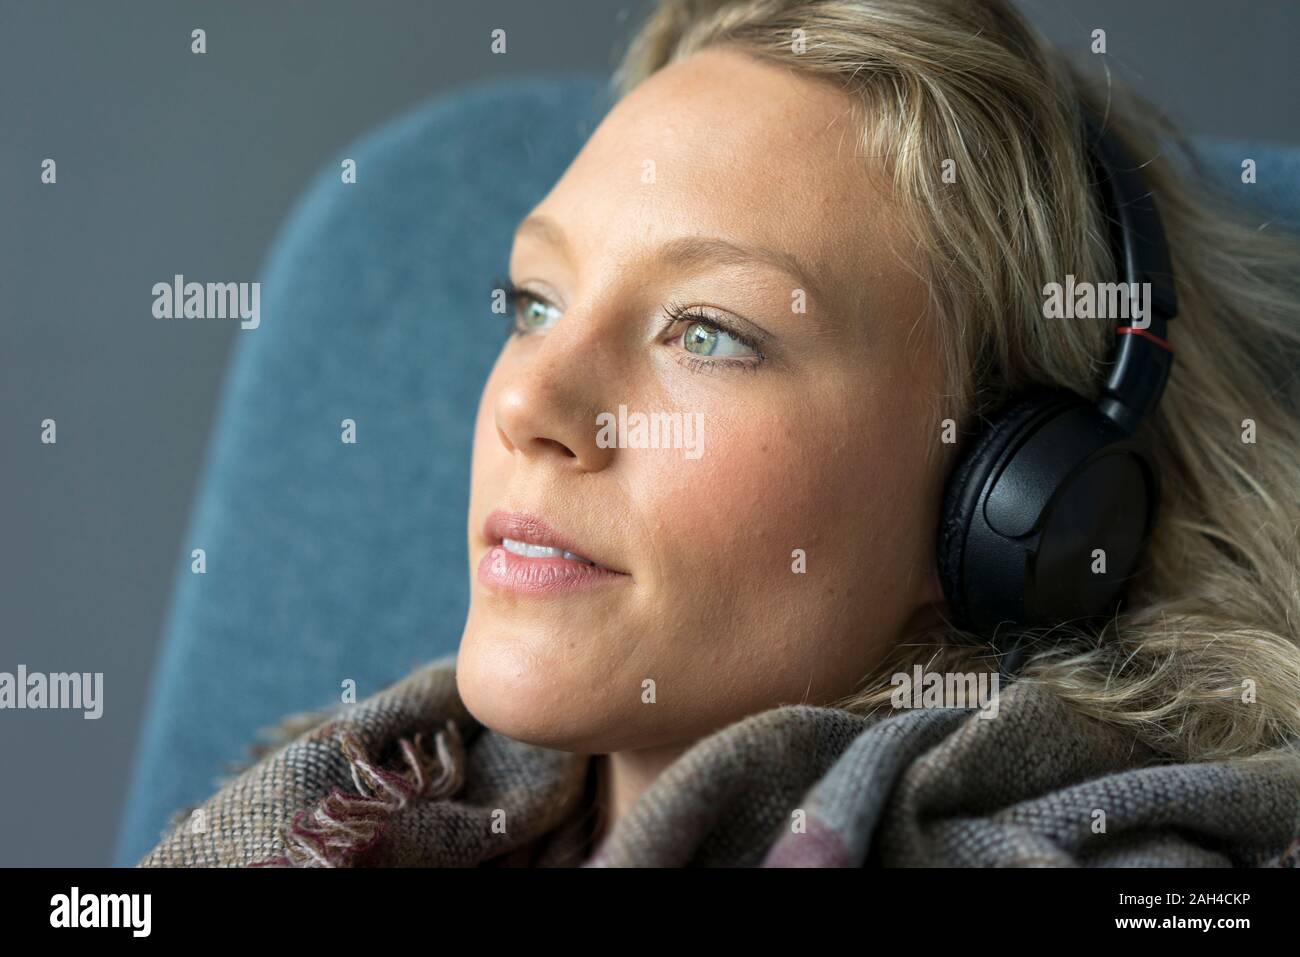 Portrait of young woman listening to music with headphones Stock Photo